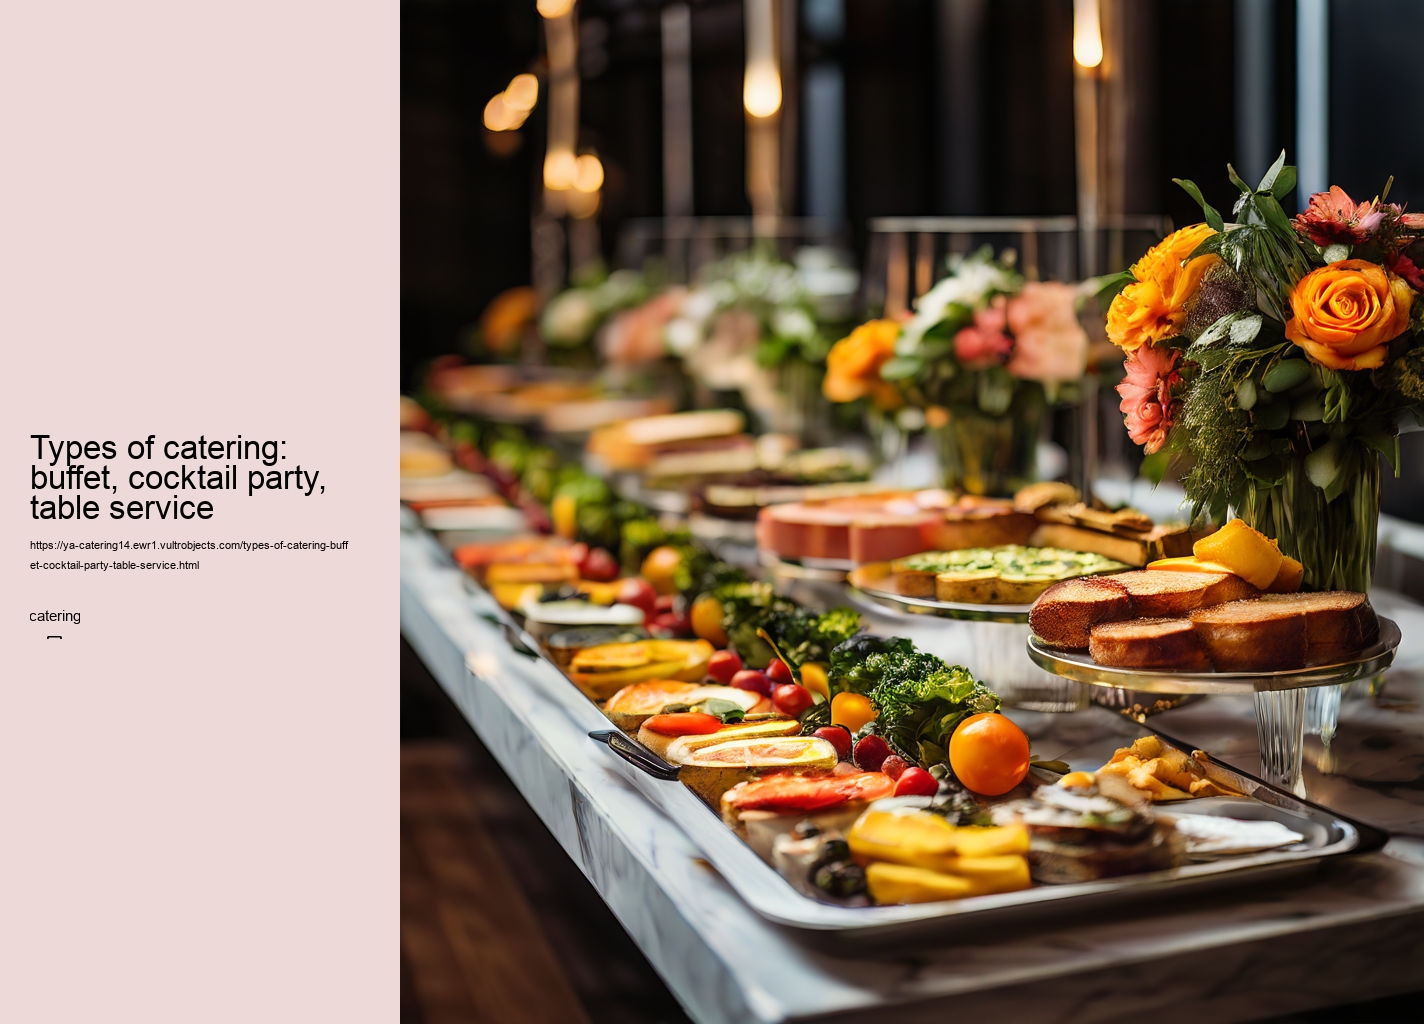 Types of catering: buffet, cocktail party, table service